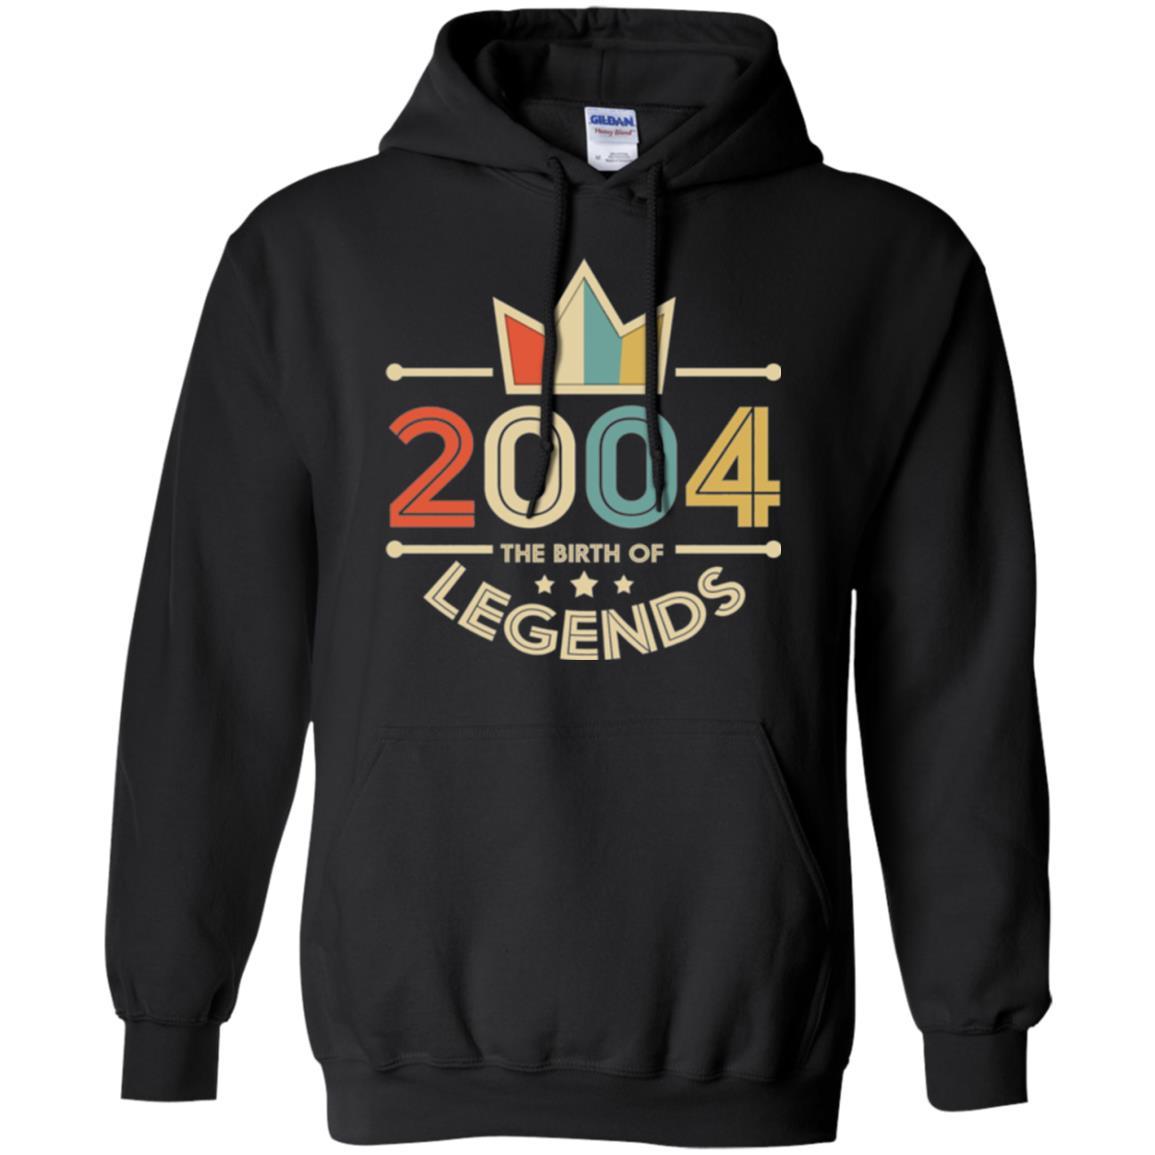 Christmas T-shirt Vintage 2004 The Birth Of Legends